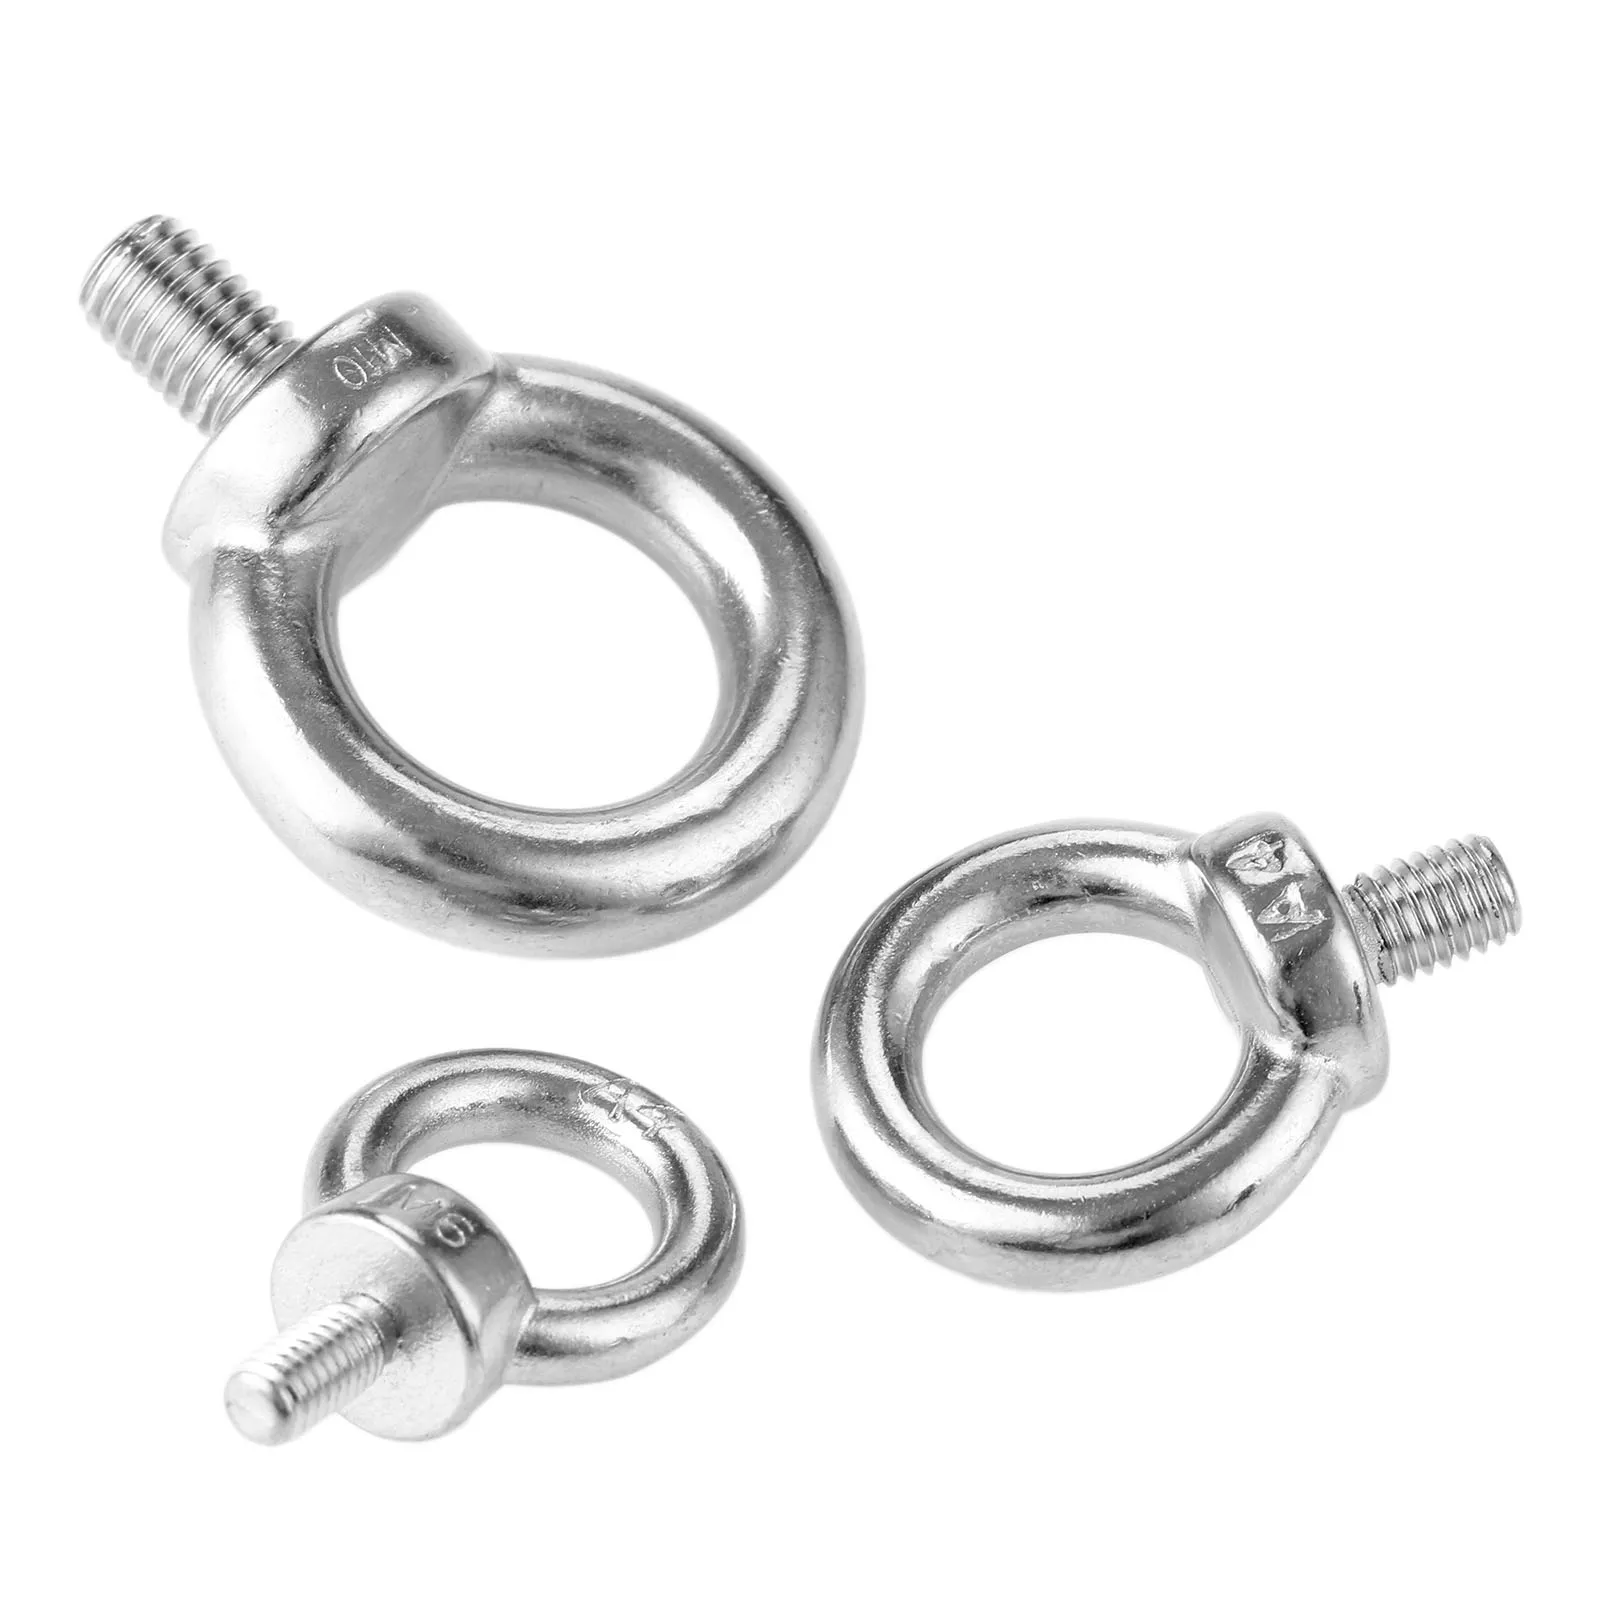 

1PC M6 M8 M10 Boats Marine Grade 316 Stainless Steel Eyebolt Lifting Eye Bolts Ring Screw Loop Hole Bolt For Cable Rope Lifting